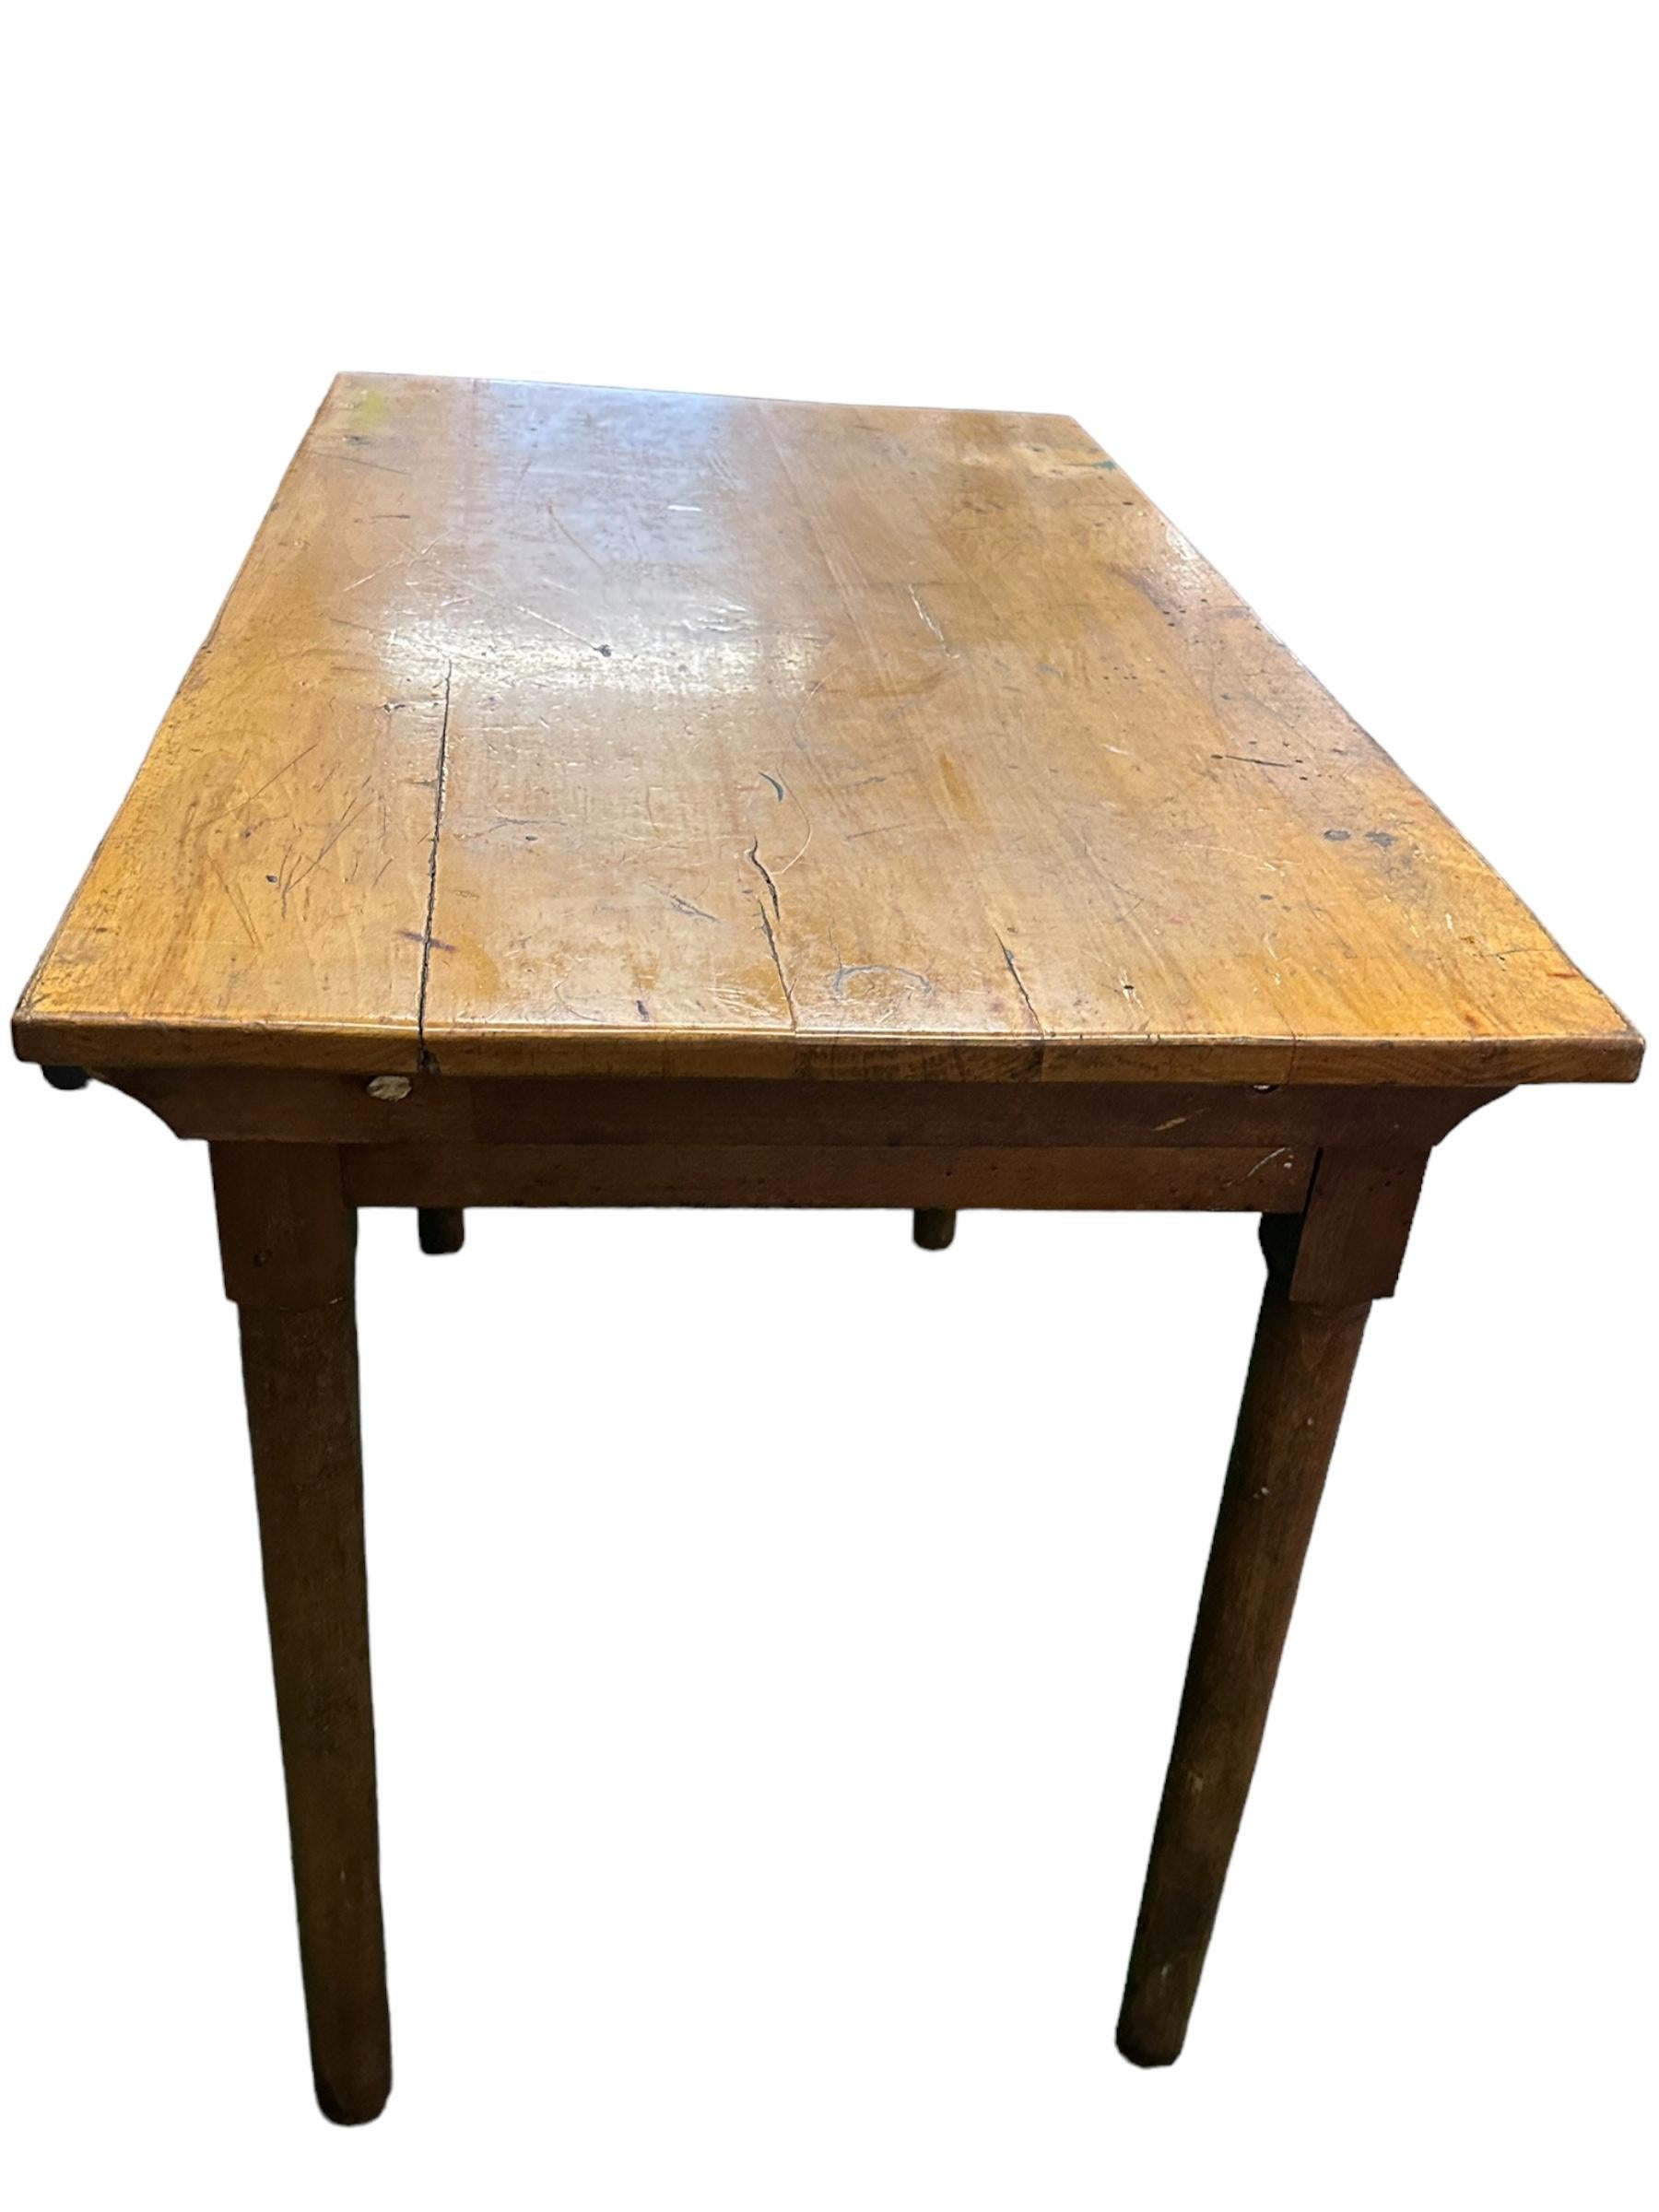 Wood Folk Art Cottage Farm Tavern Table out of Humbser Brewery Fürth Bavaria 1950s For Sale